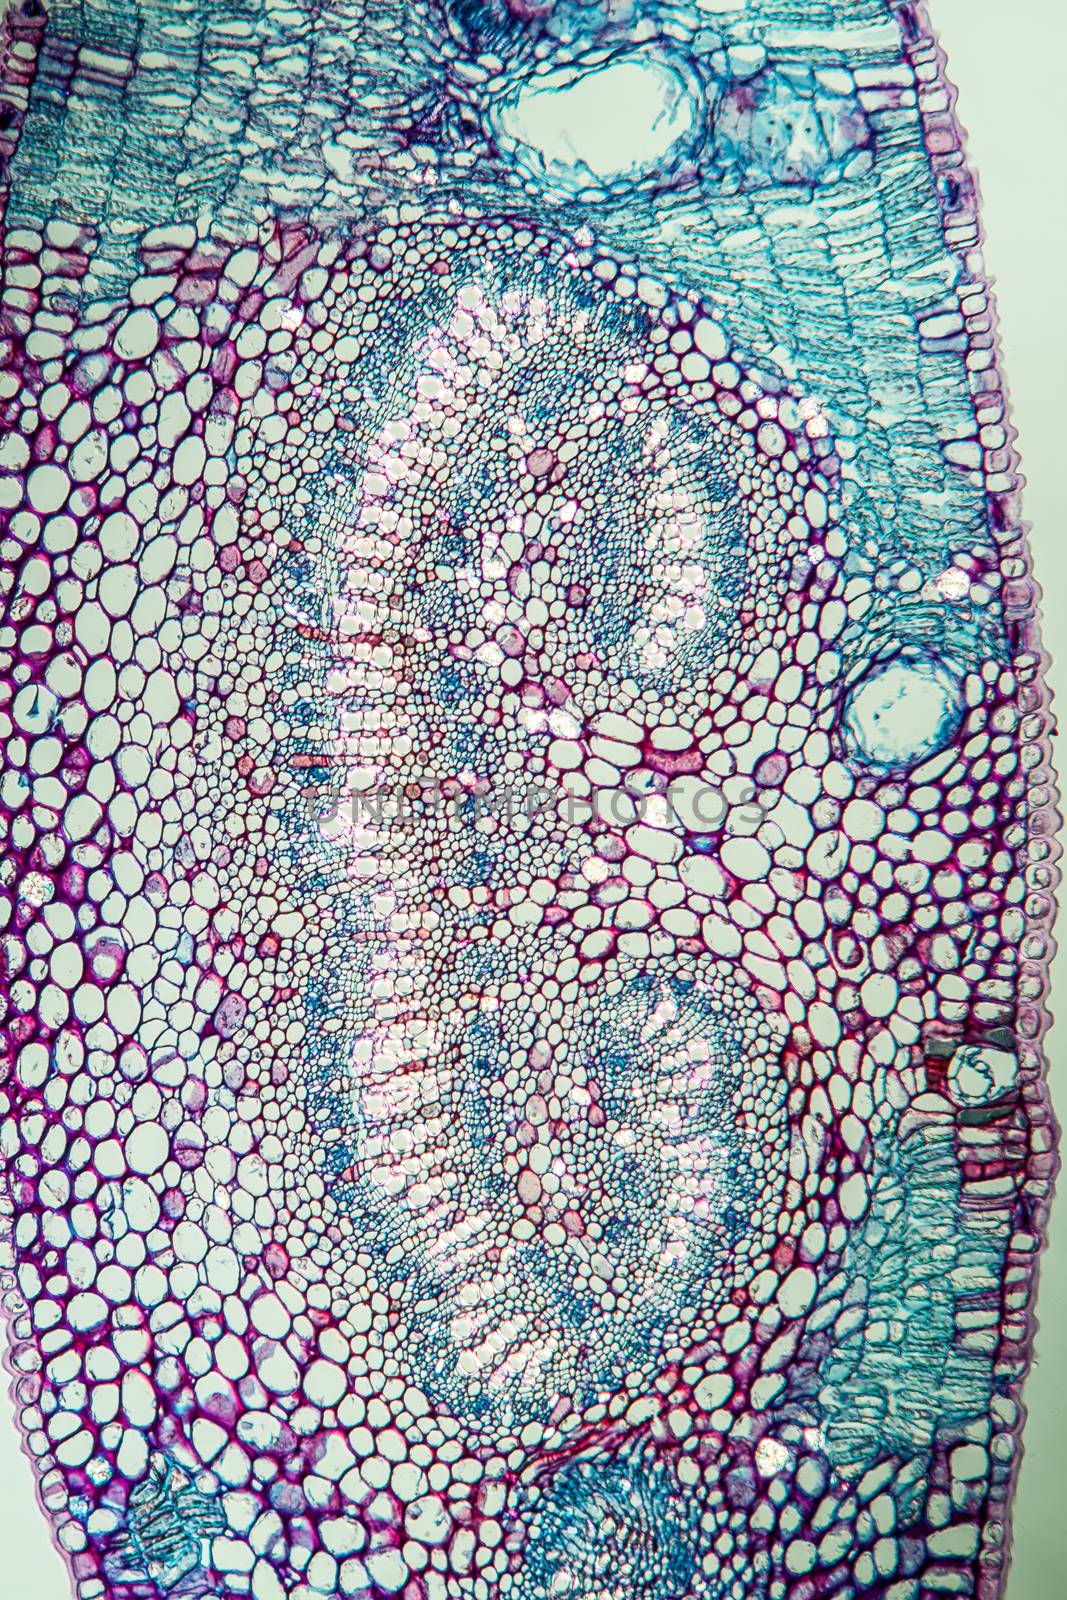 Eucalyptus cross section through leaf 100x by Dr-Lange